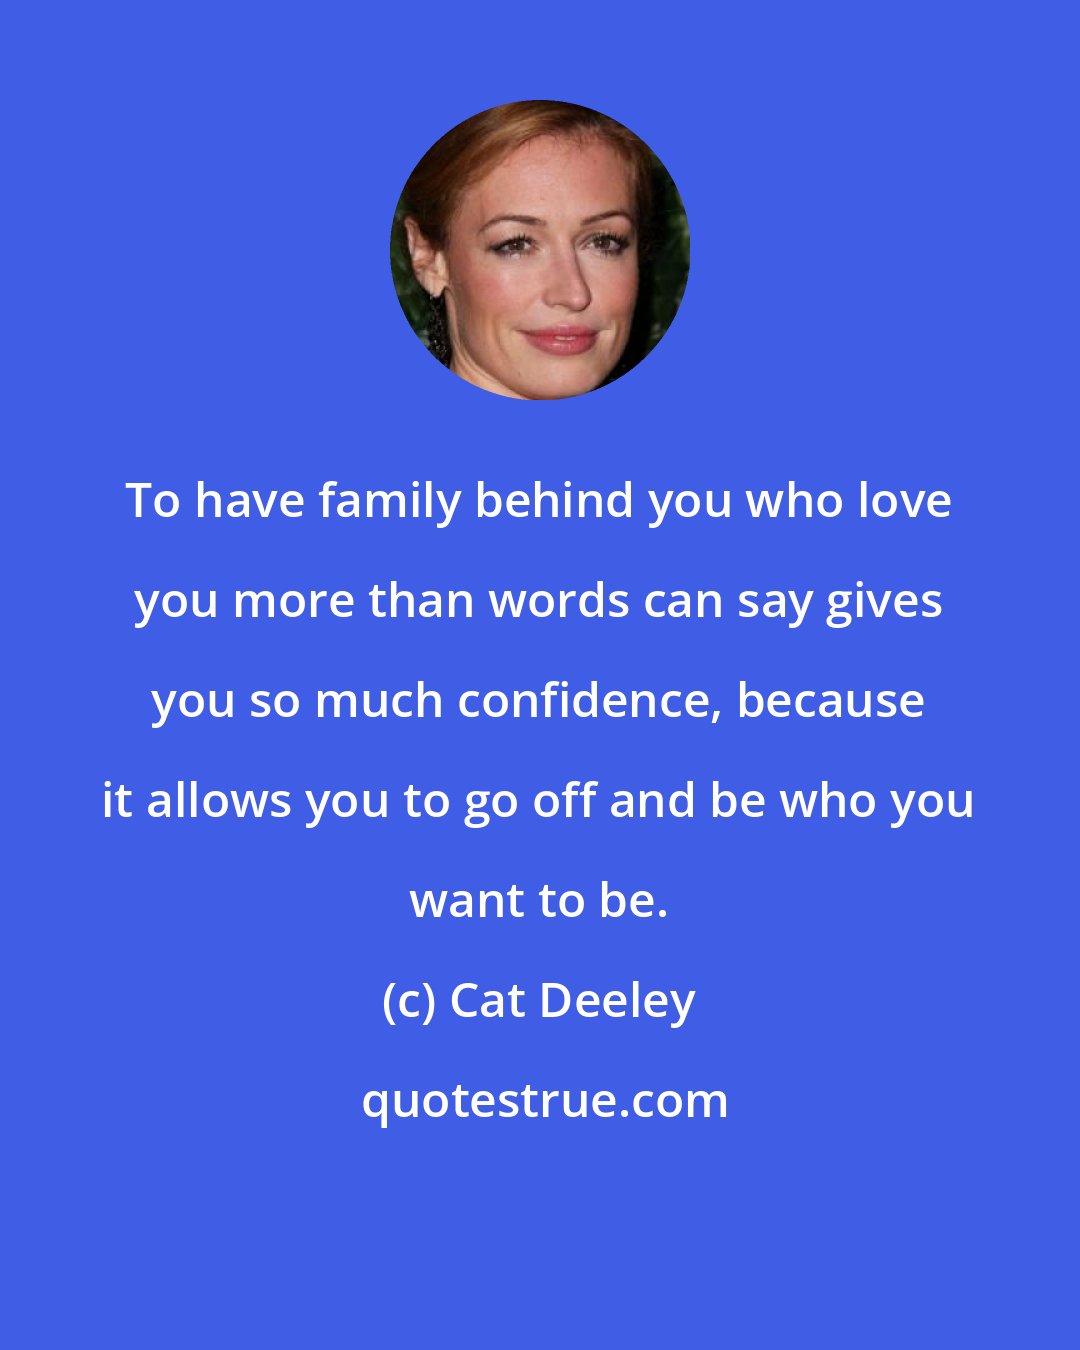 Cat Deeley: To have family behind you who love you more than words can say gives you so much confidence, because it allows you to go off and be who you want to be.